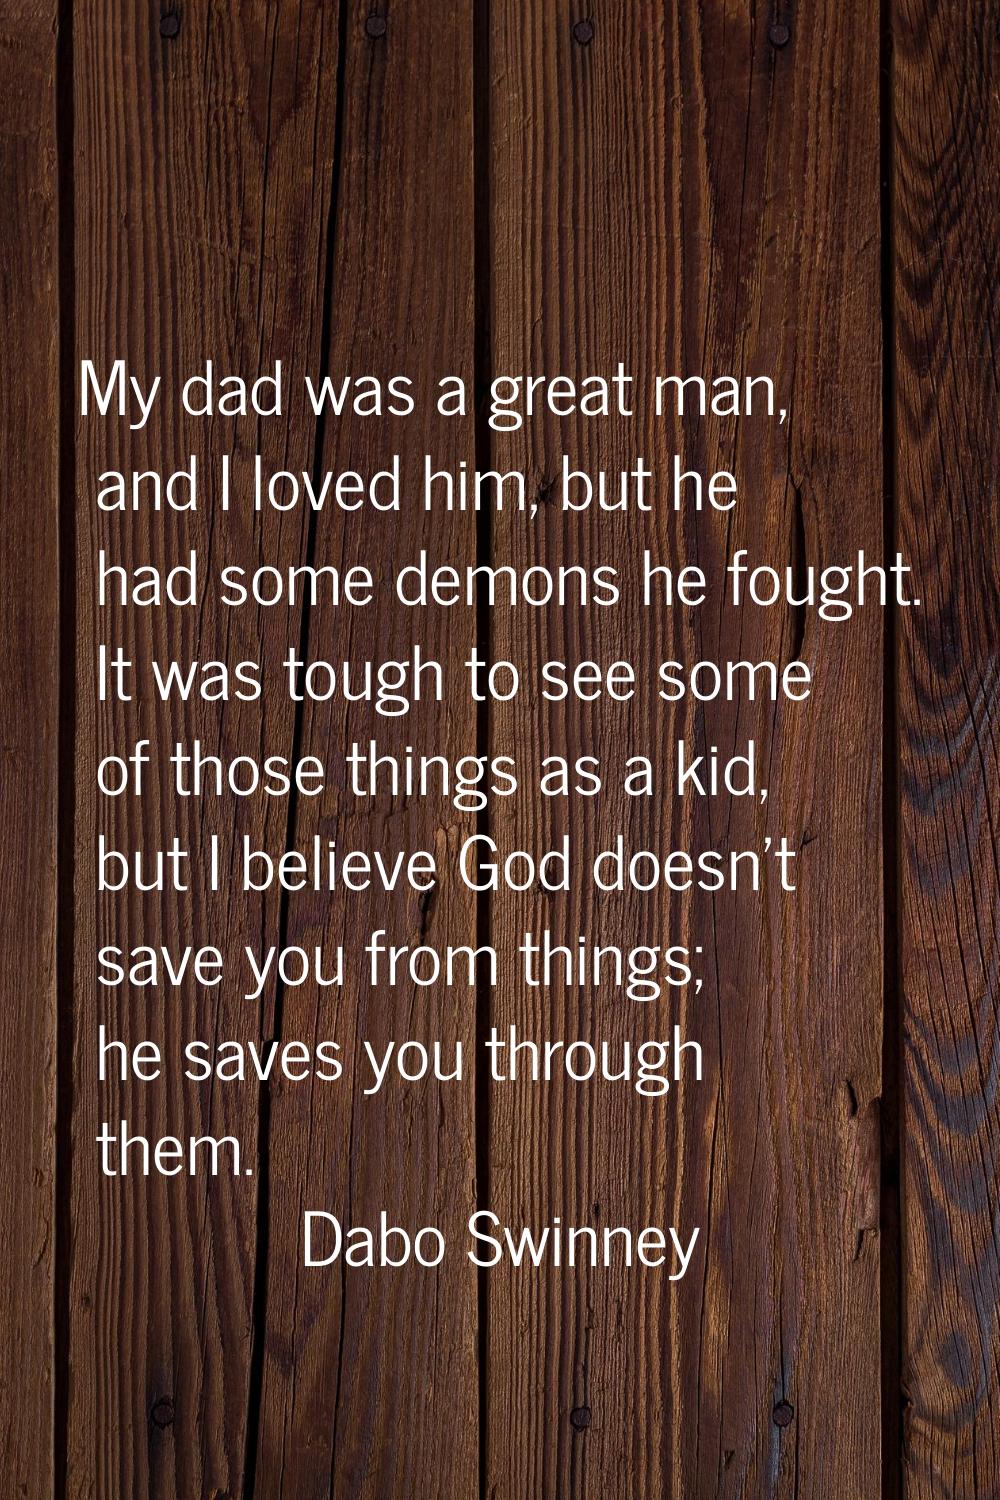 My dad was a great man, and I loved him, but he had some demons he fought. It was tough to see some